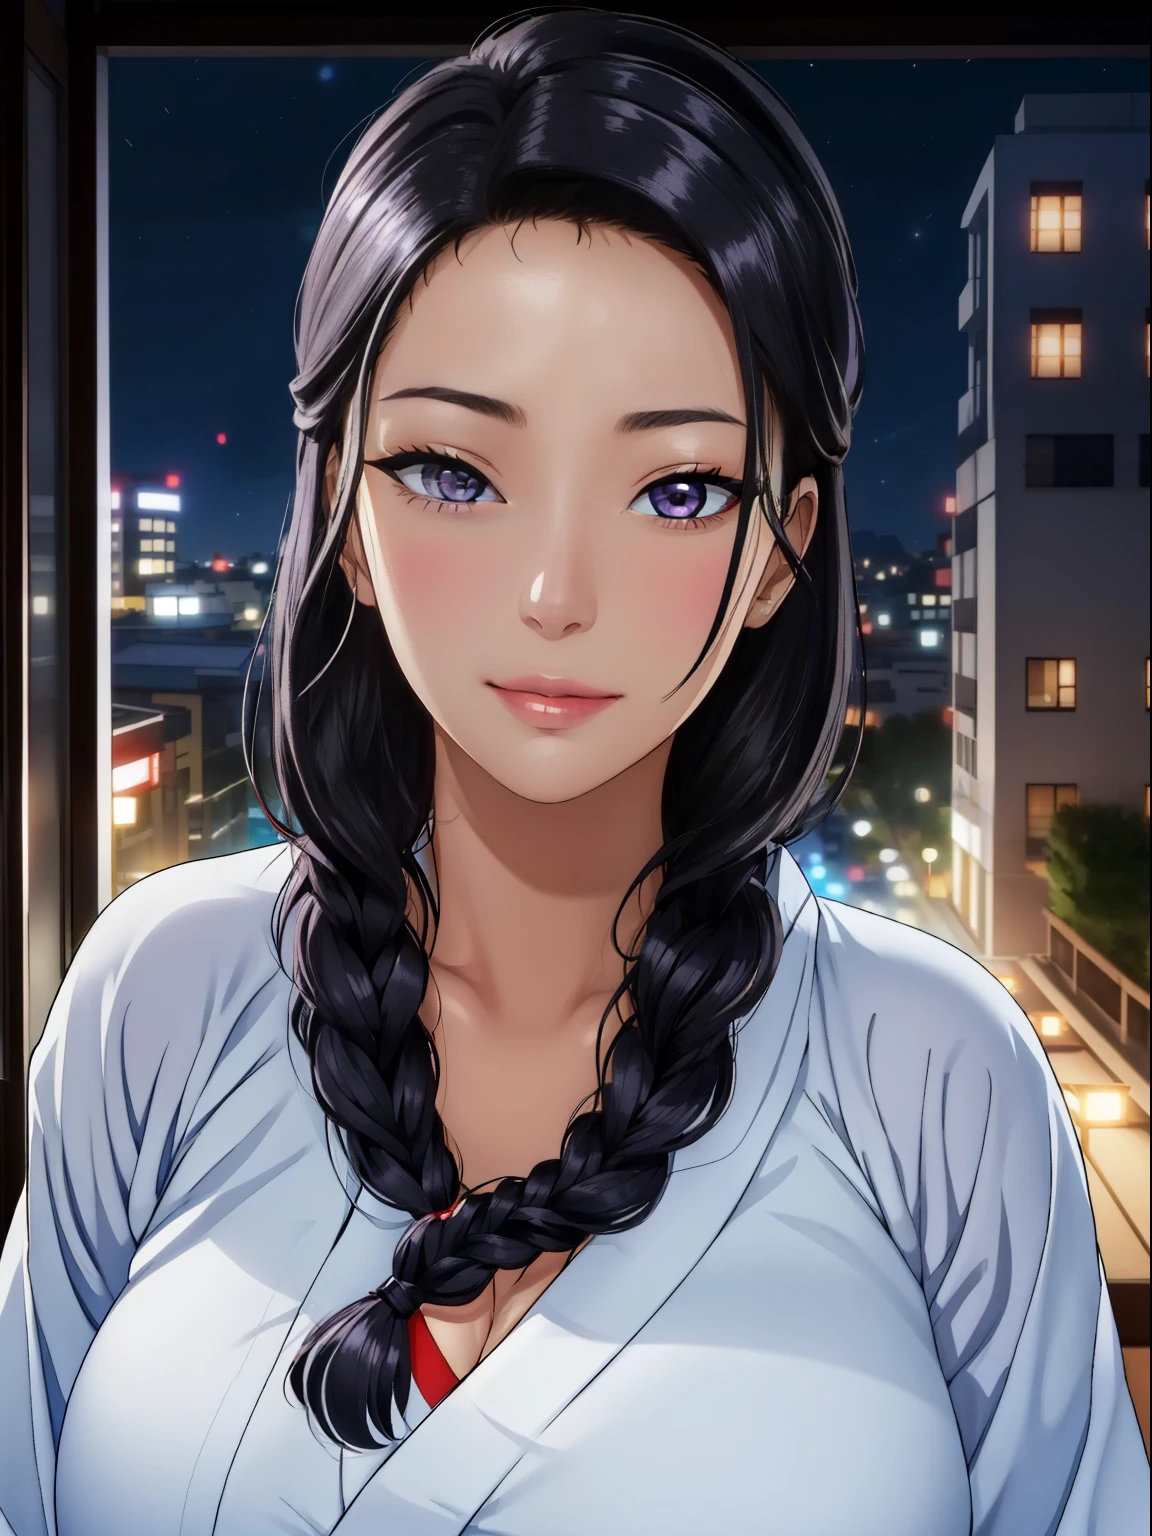 (night:1.7), Japan, Tokyo, City view, in front of the window,
looking at the viewer, (fascinating look:1.2), Happy, 笑face,
(white_kimono:1.3),cleavage,
black_hair, length_hair, hair_pulled_return,Broke up_lips,purple_eye, Braid,
1 girl, 24-years-old,mature woman,beautiful Finger,beautiful length legs,beautiful body,beautiful Nose,beautiful character design, perfect eye, perfect face, perfect fingers, perfect hands, Perfect chest, perfect body,
looking at the viewer, in the center of the image,
NSFW,official art,highly detailed body, exteremly detailed face, extremely detailed hair, extremely detailed eye, wallpaper, perfect lighting,Farbeful, bright_front_face_lit,
(masterpiece:1.0),(Highest_quality:1.0), 超High resolution,4K,super detailed,
photograph, 8K, HDR, High resolution, disorganized:1.2, kodak portrait 400, film grain, blurry returnground, bokeh:1.2, Lens flare, (lively_Farbe:1.2)
(beautiful,big_chest:1.4), (beautiful_face:1.5),(narrow_waist),